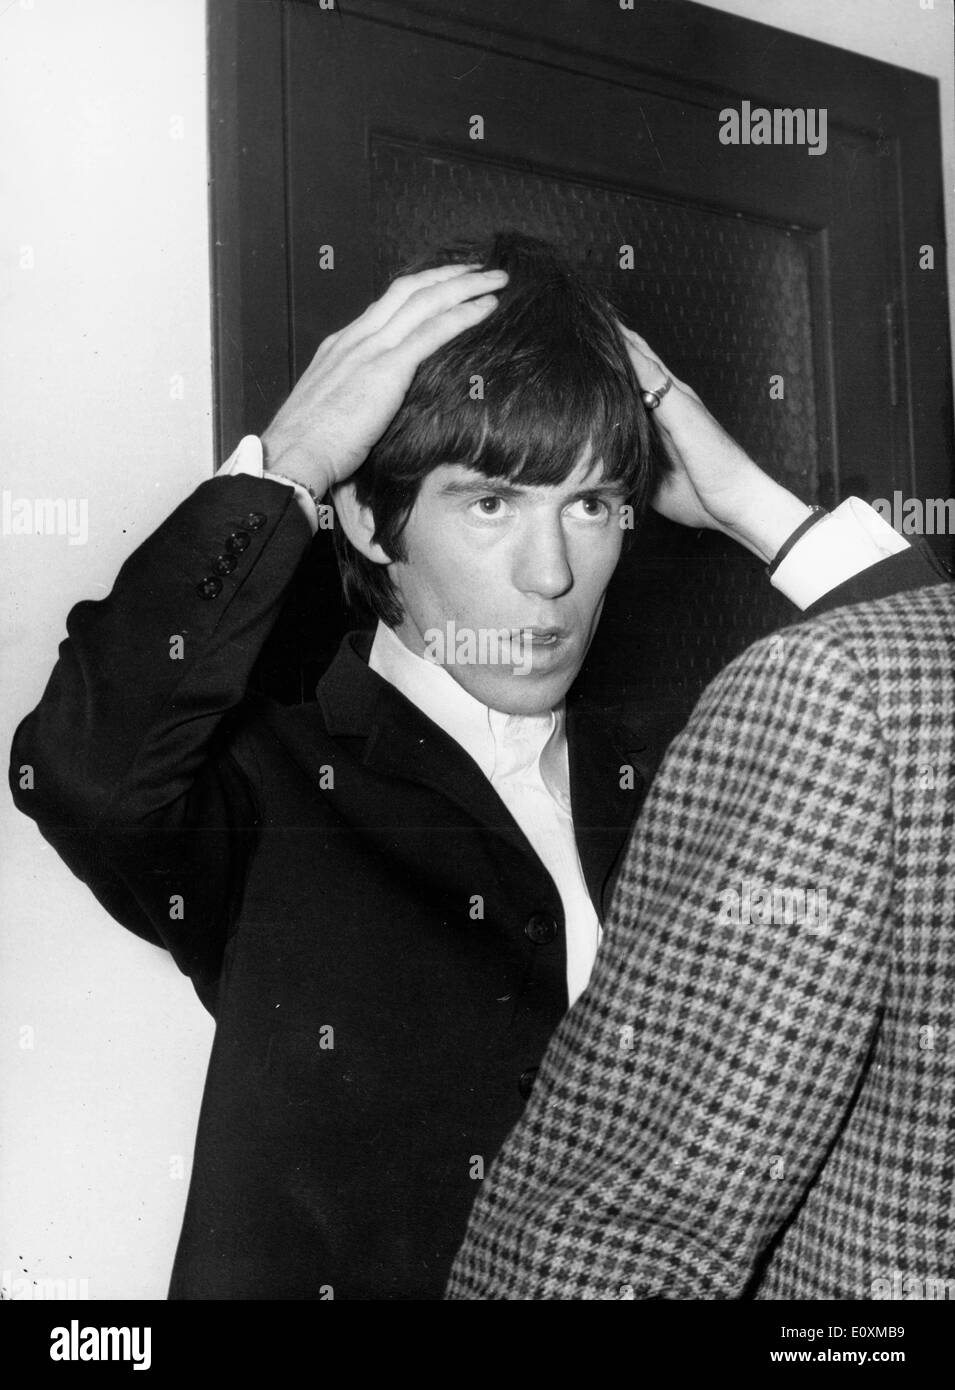 The Rolling Stones guitarist Keith Richards fixing his hair Stock Photo